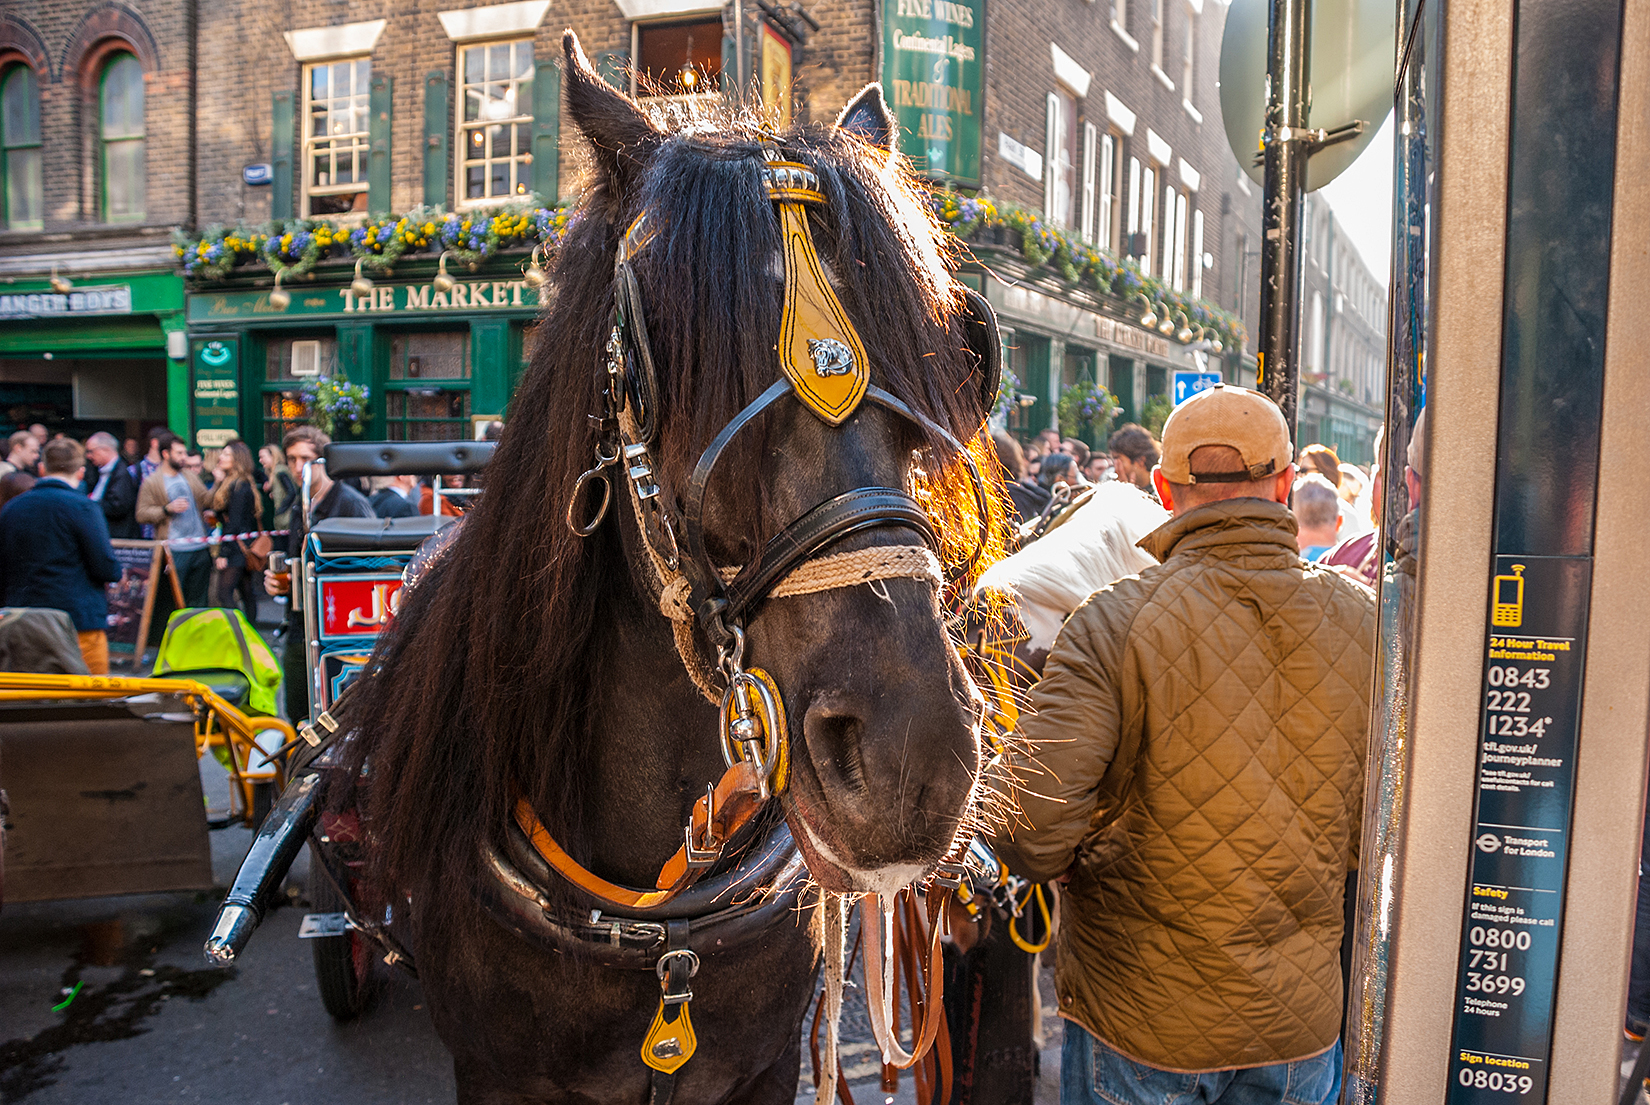 Horse-drawn carriage outside the Market Trader pub